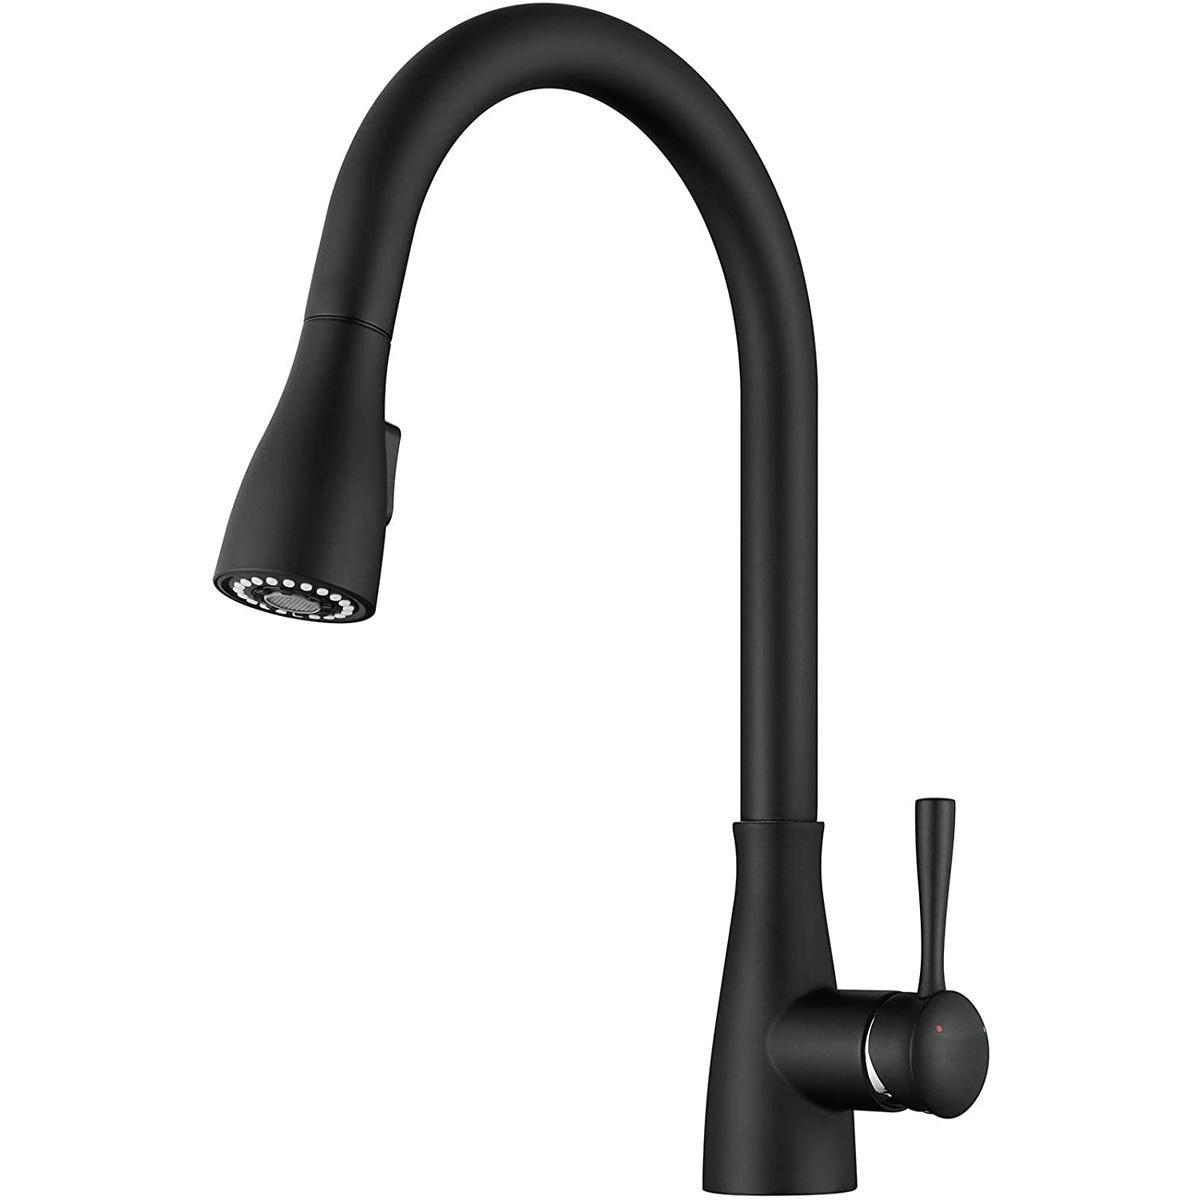 Neobano Matte Black Kitchen Faucet with Sprayer for $24.95